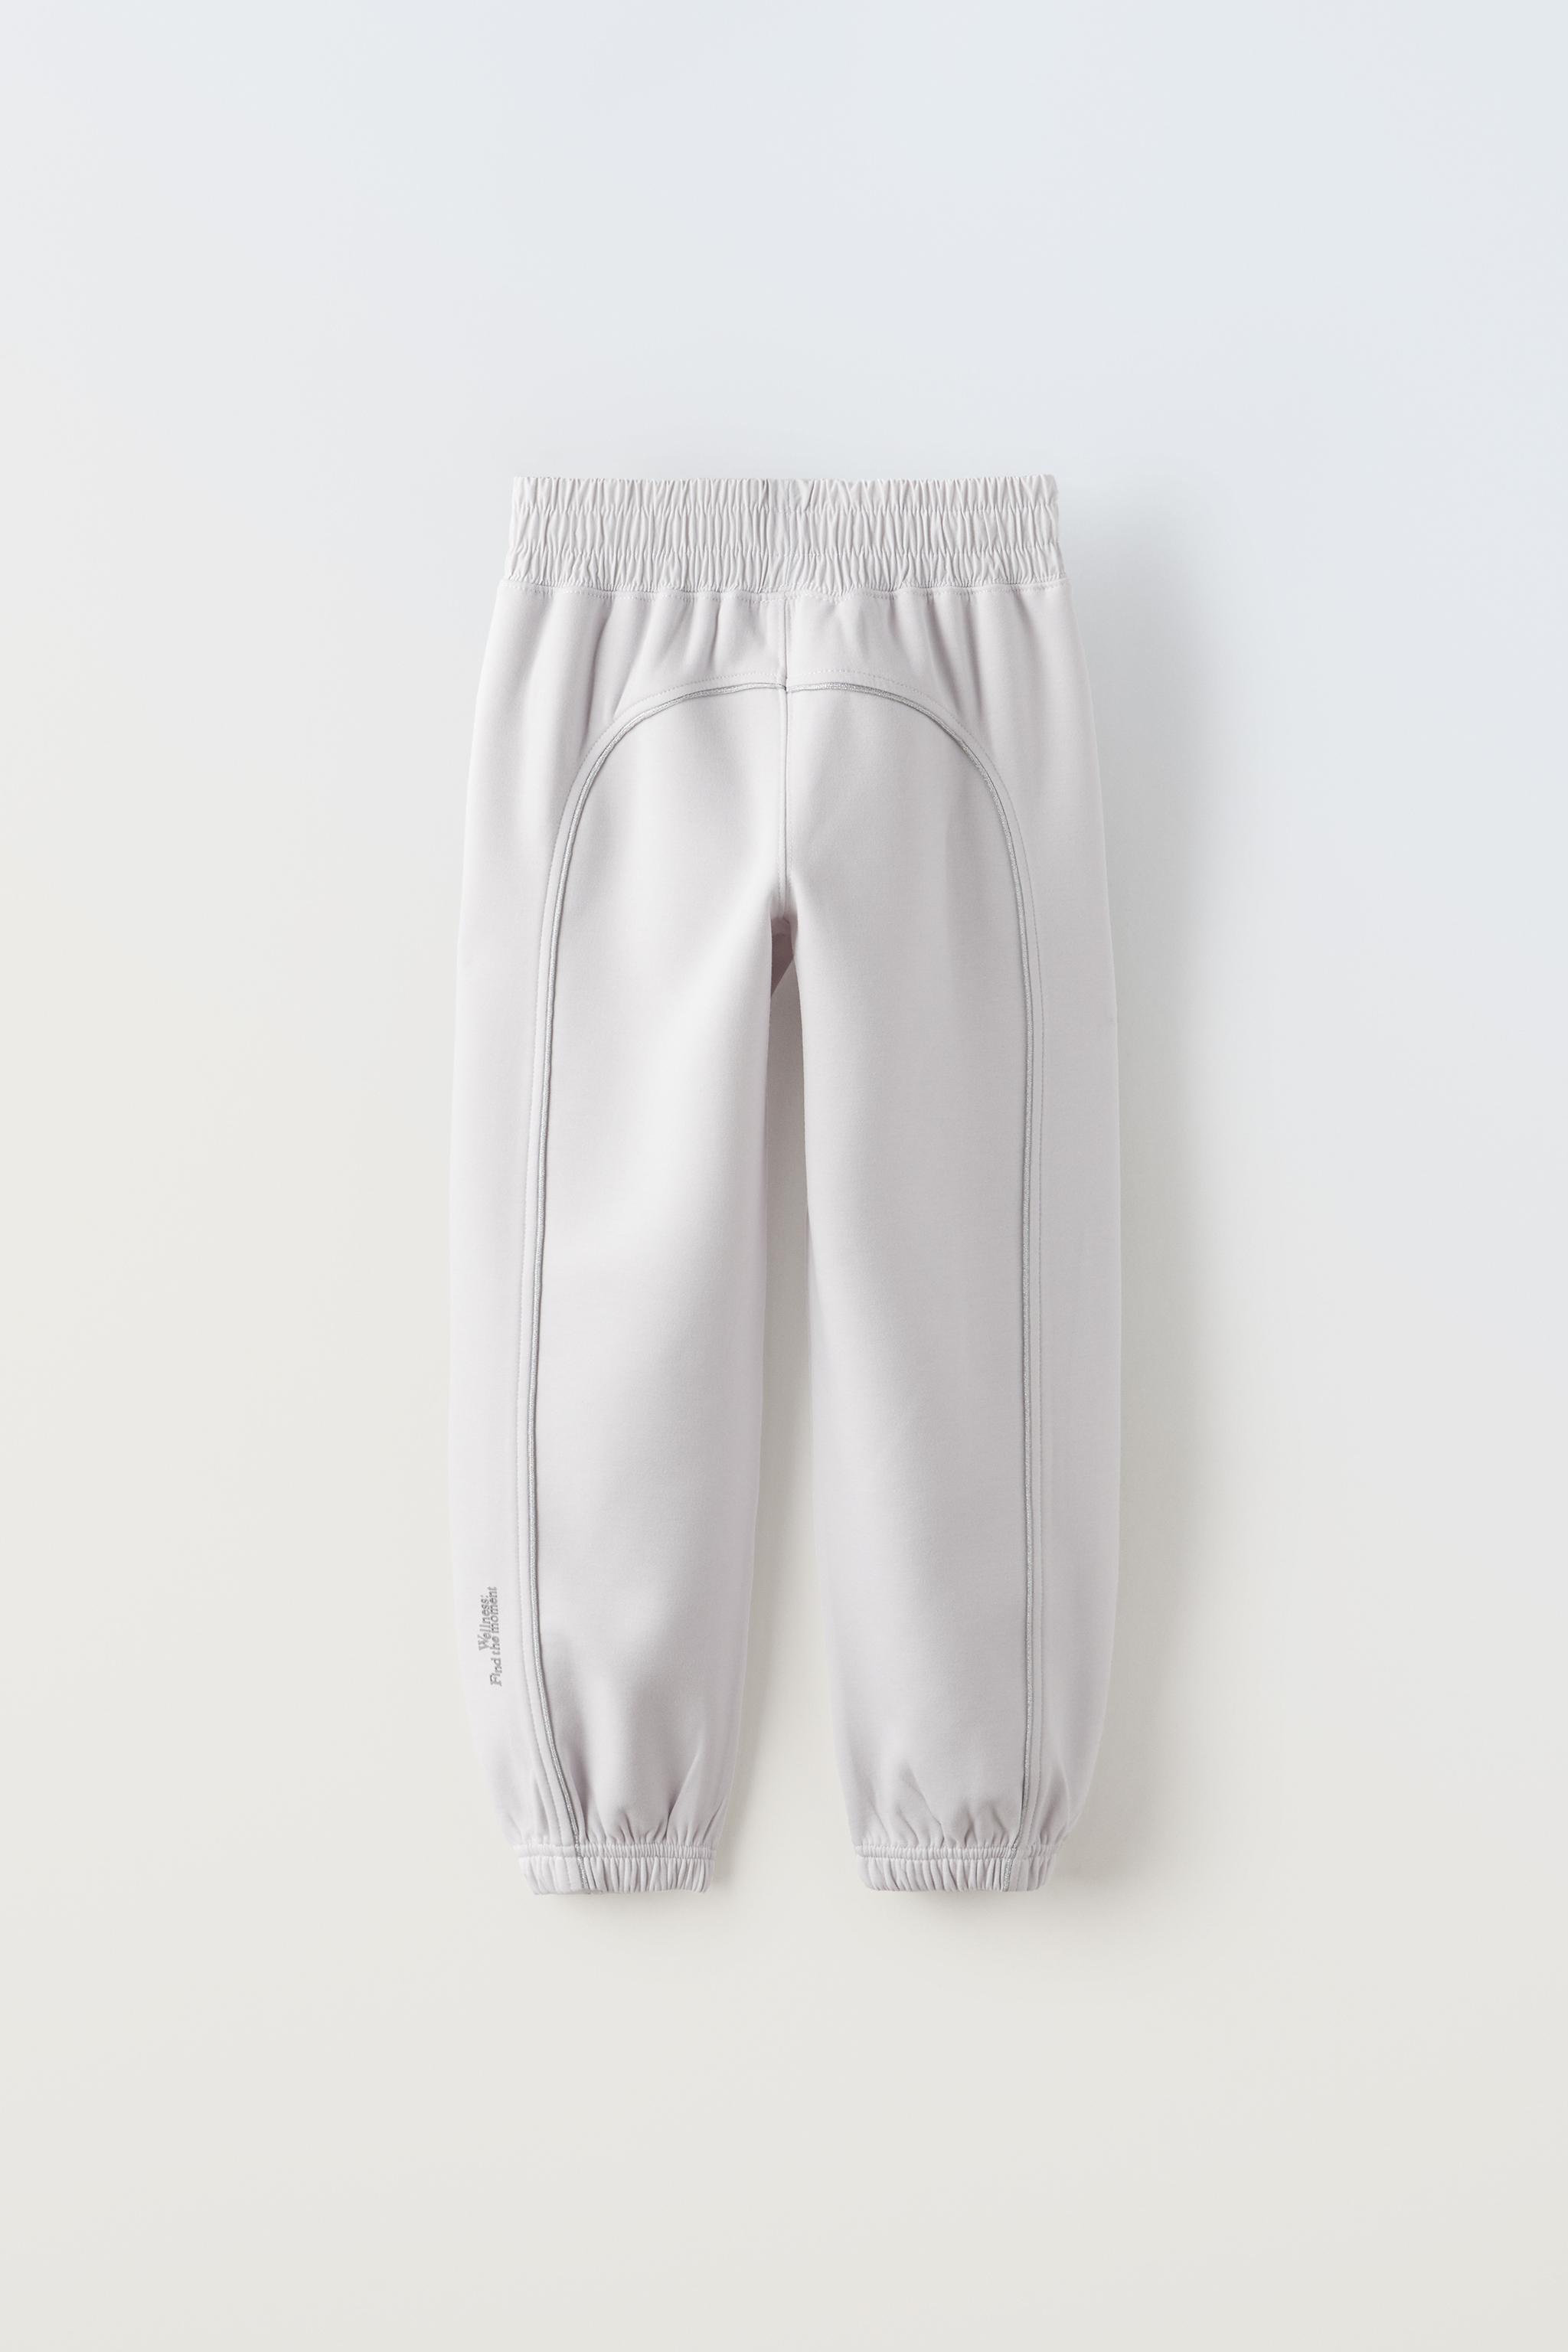 Zara Power Stretch Jogging Pants, Want to Master Sporty-Chic? White  Sweatpants Are the Name of the Game